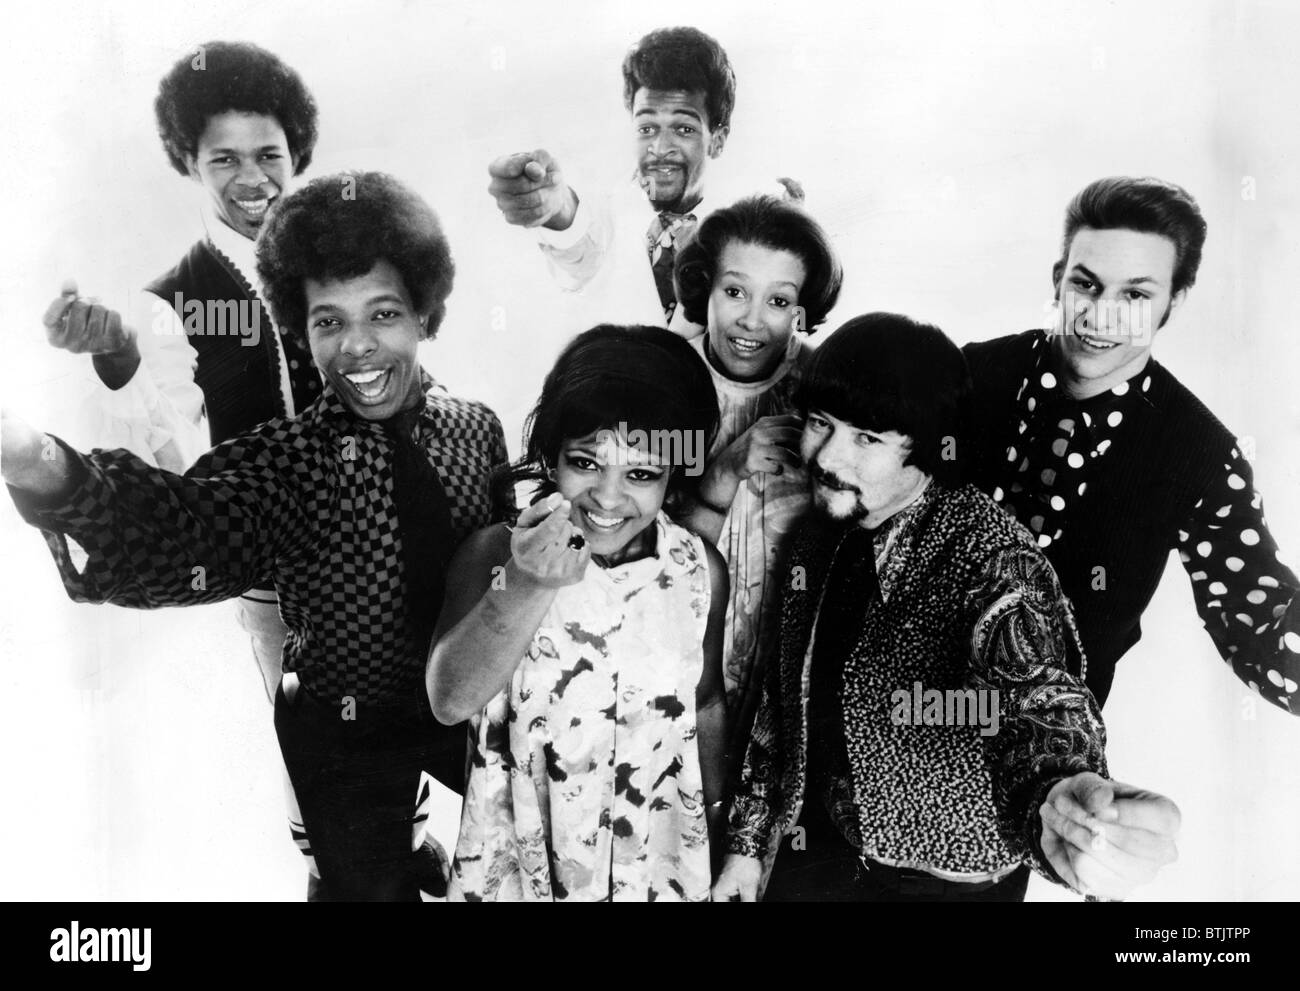 SLY AND THE FAMILY STONE, c. 1968. Stock Photo